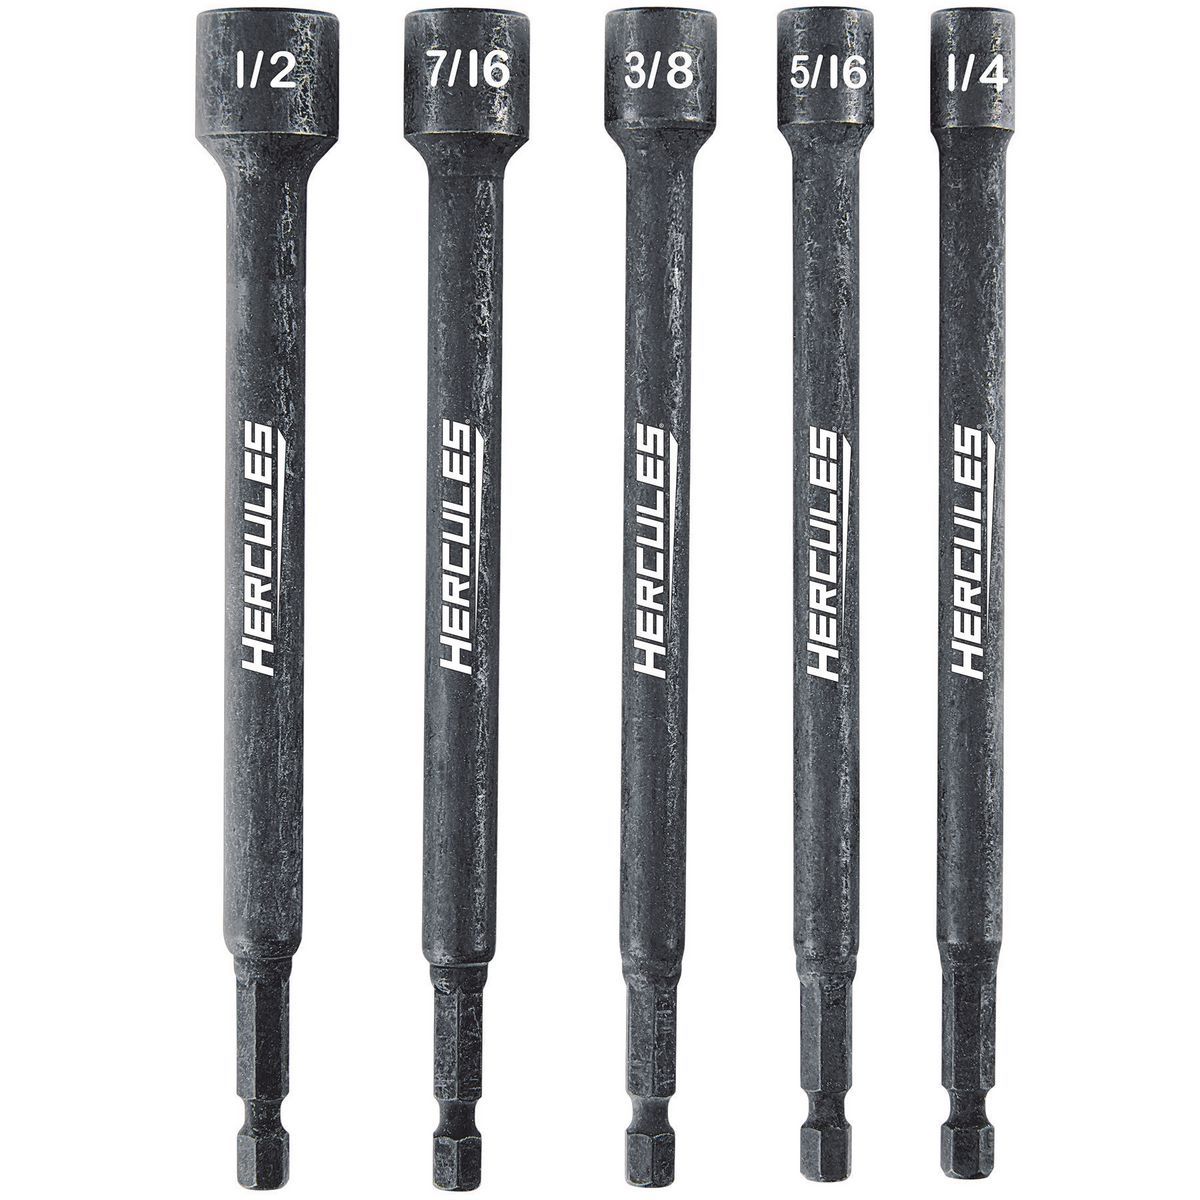 HERCULES 6 in. Impact Rated Magnetic SAE Nut Setters, 5 Piece